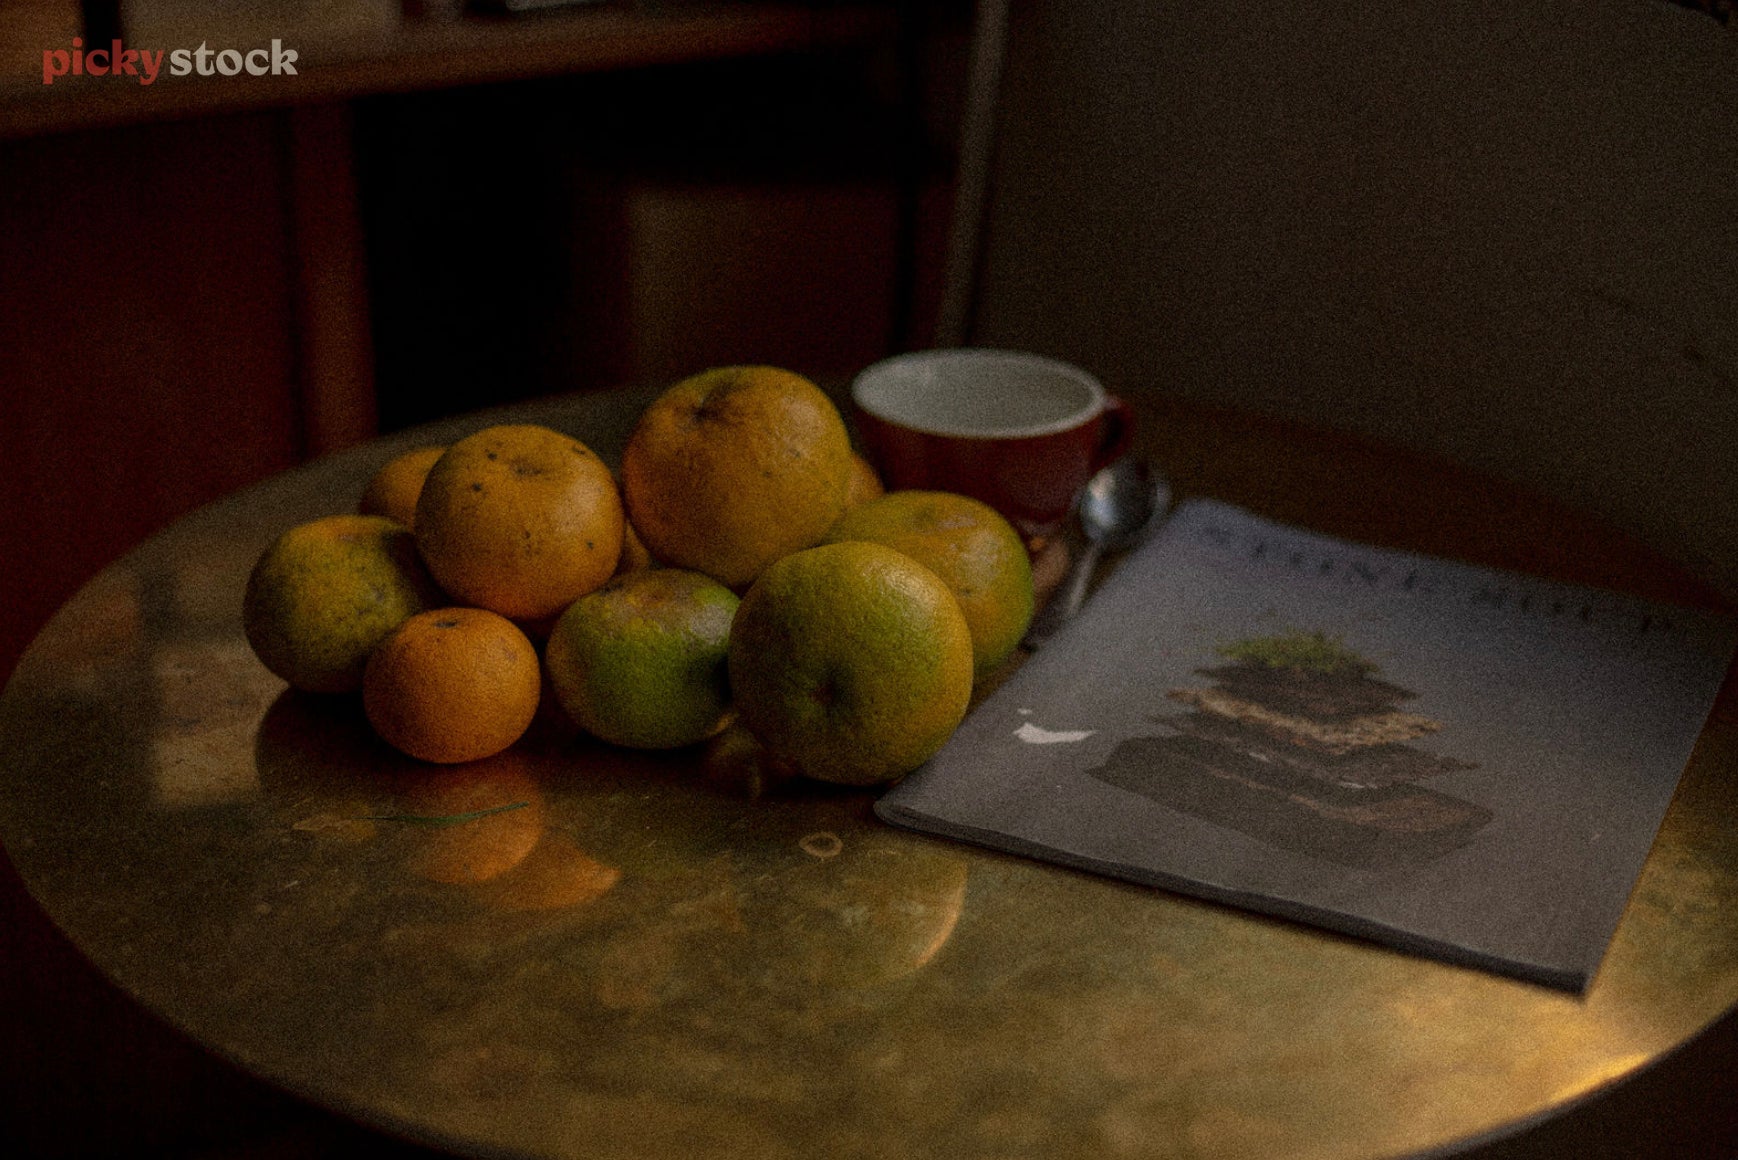 Still life style dramatic scene, with fruit stacked up on table.